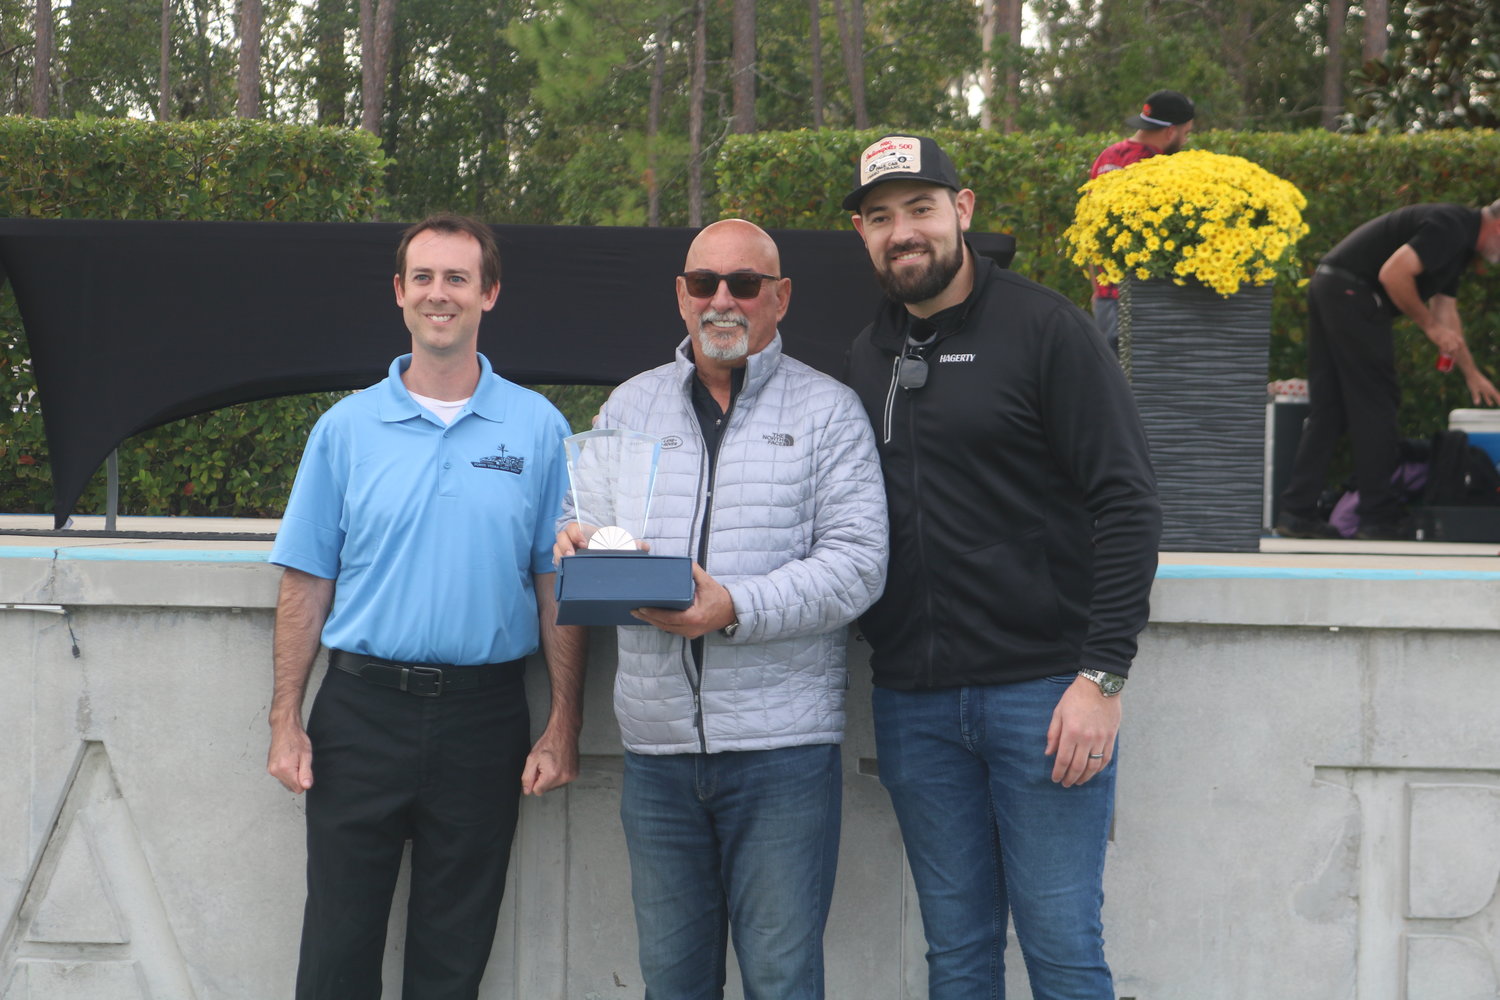 Bobby Rahal (center) receives his award for “Best in Show” at the 2022 Ponte Vedra Auto Show.